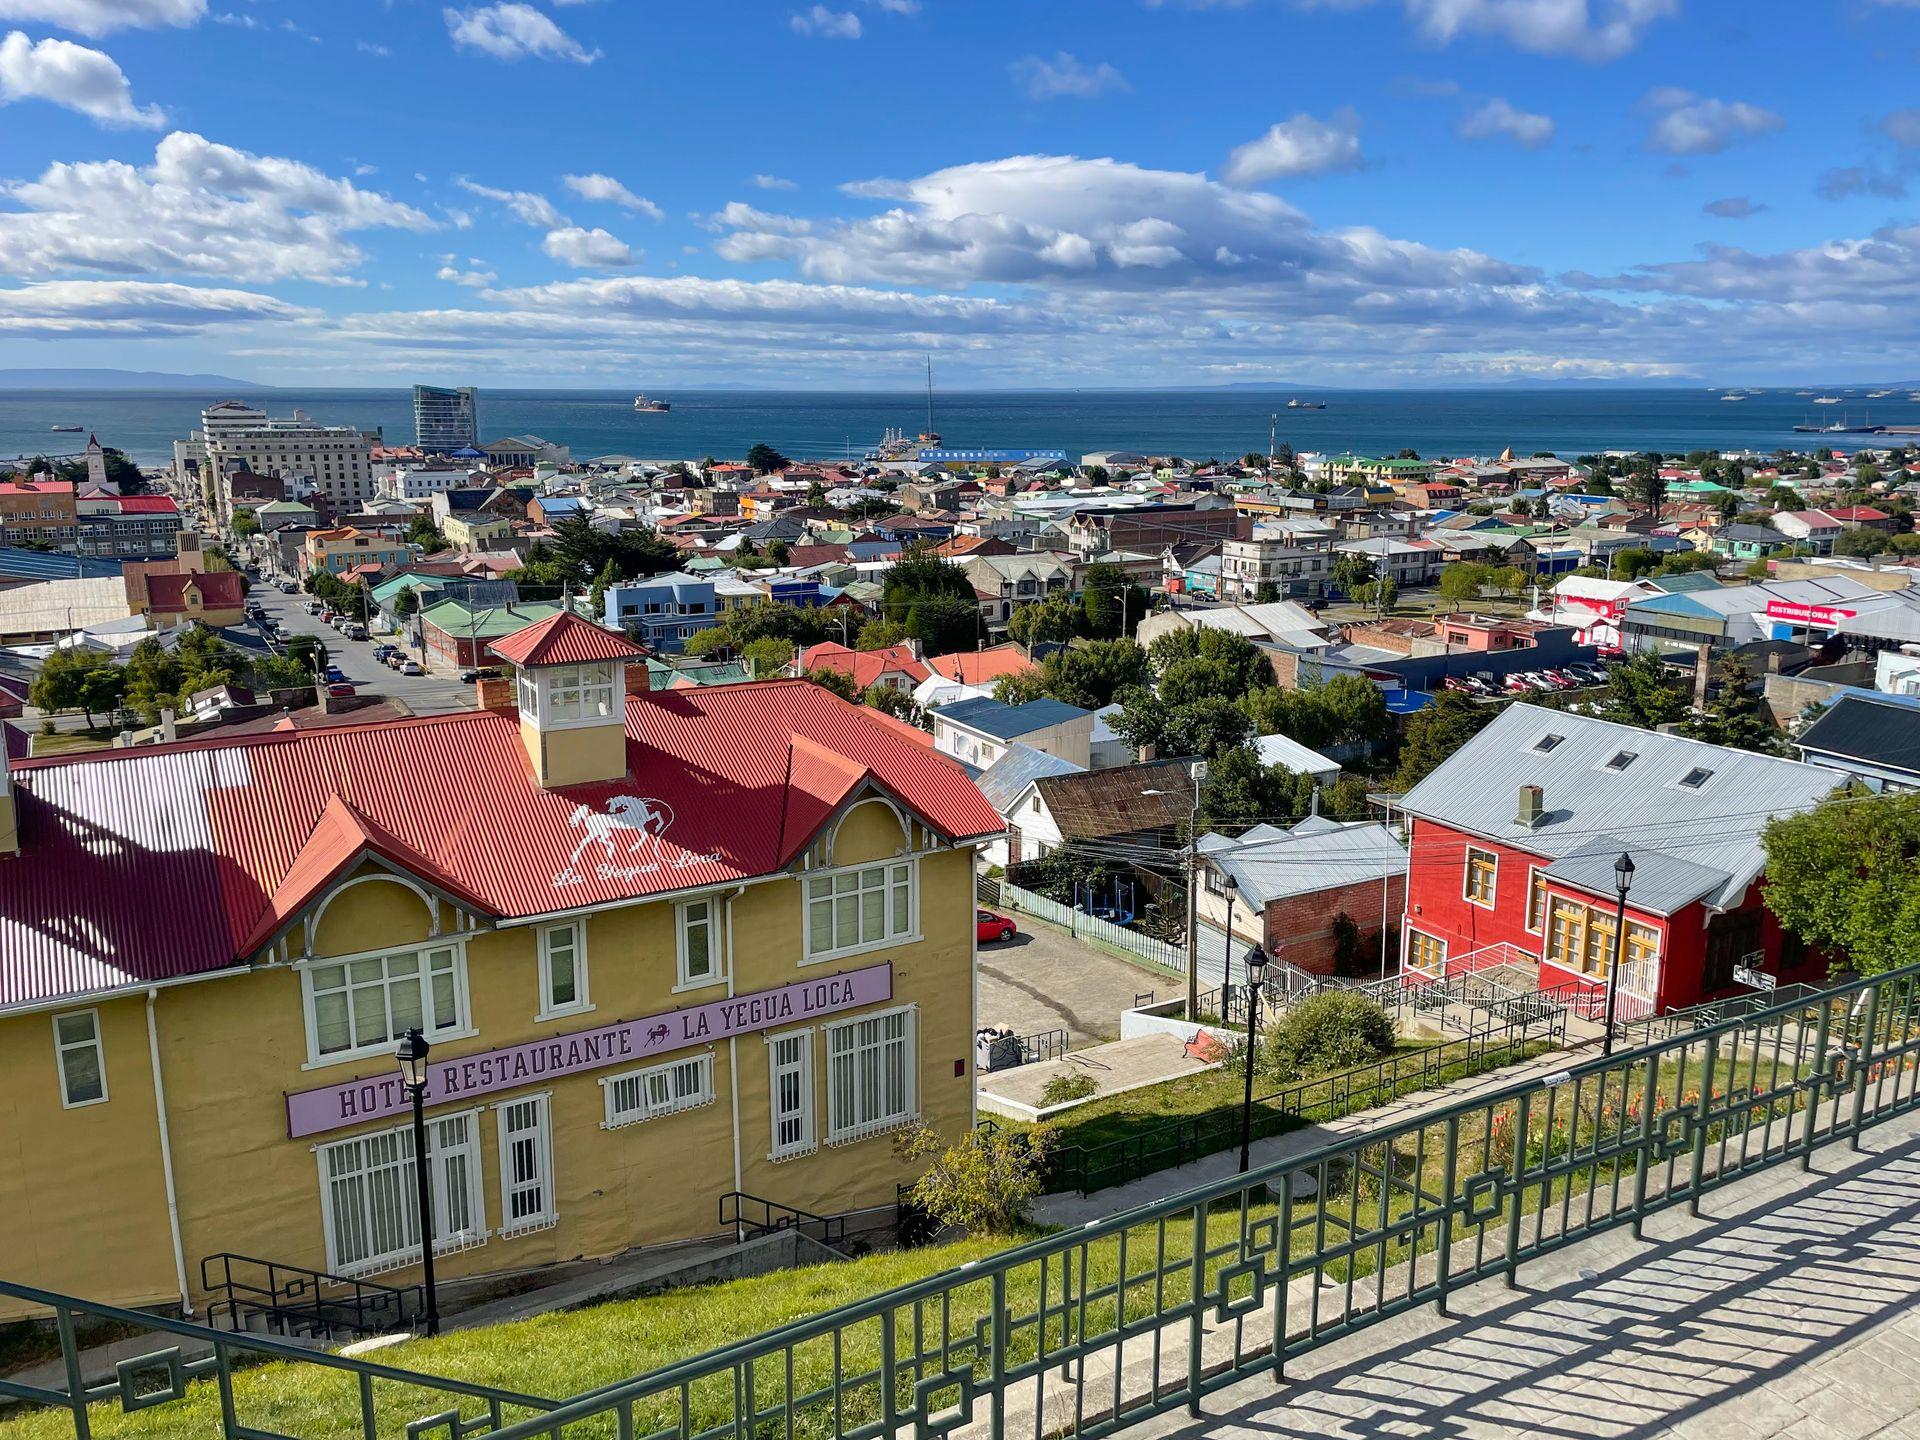 Looking down at a colorful city with the ocean in the distance. In the foreground is a yellow hotel with a red roof.